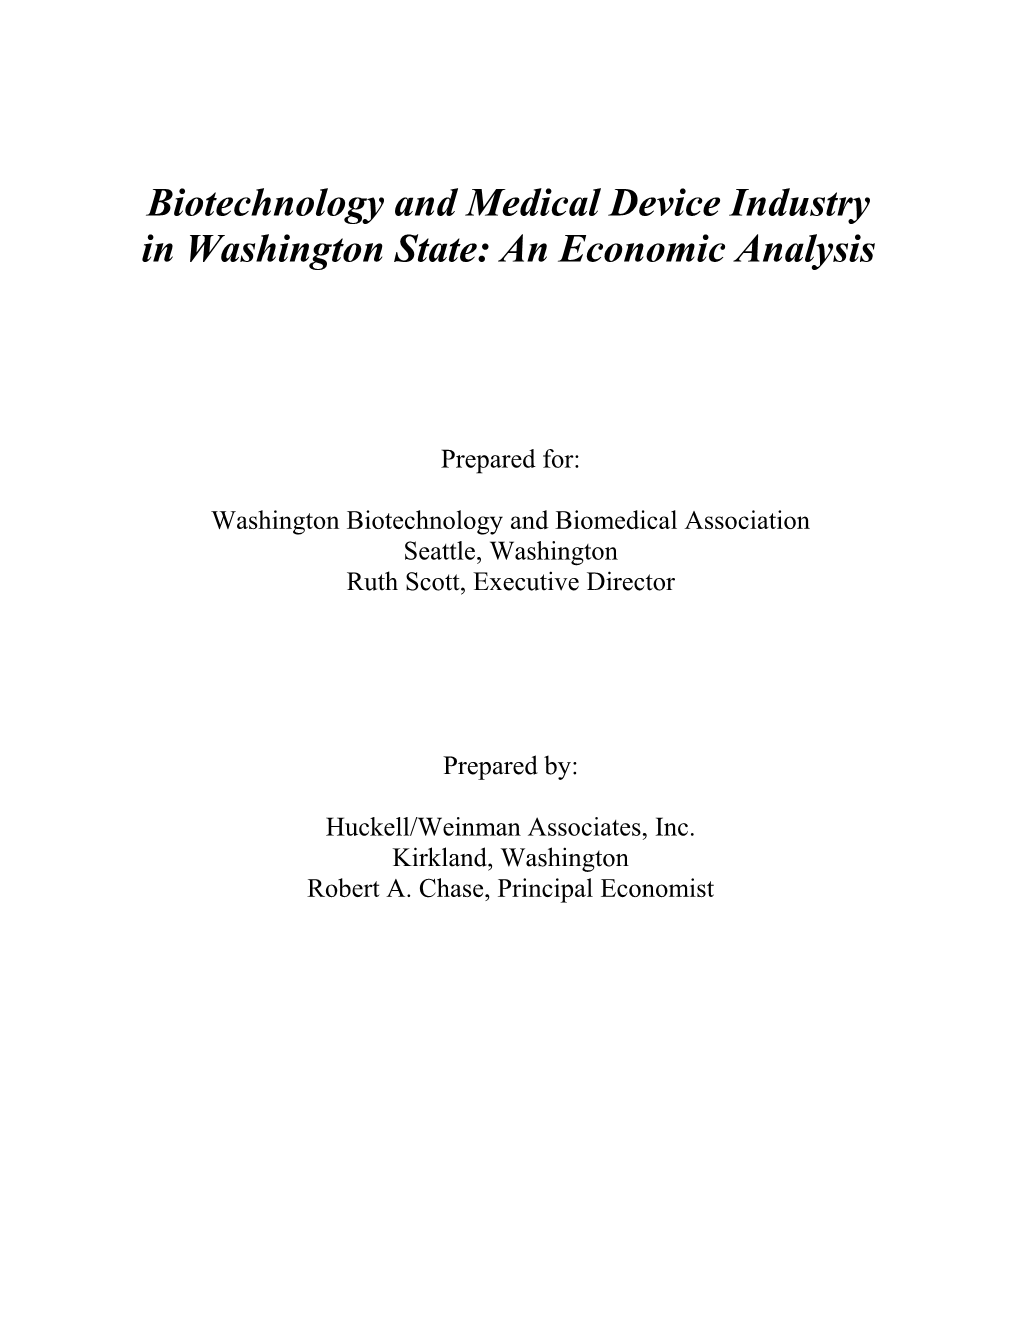 Biotechnology and Medical Device Industry in Washington: an Economic Analysis